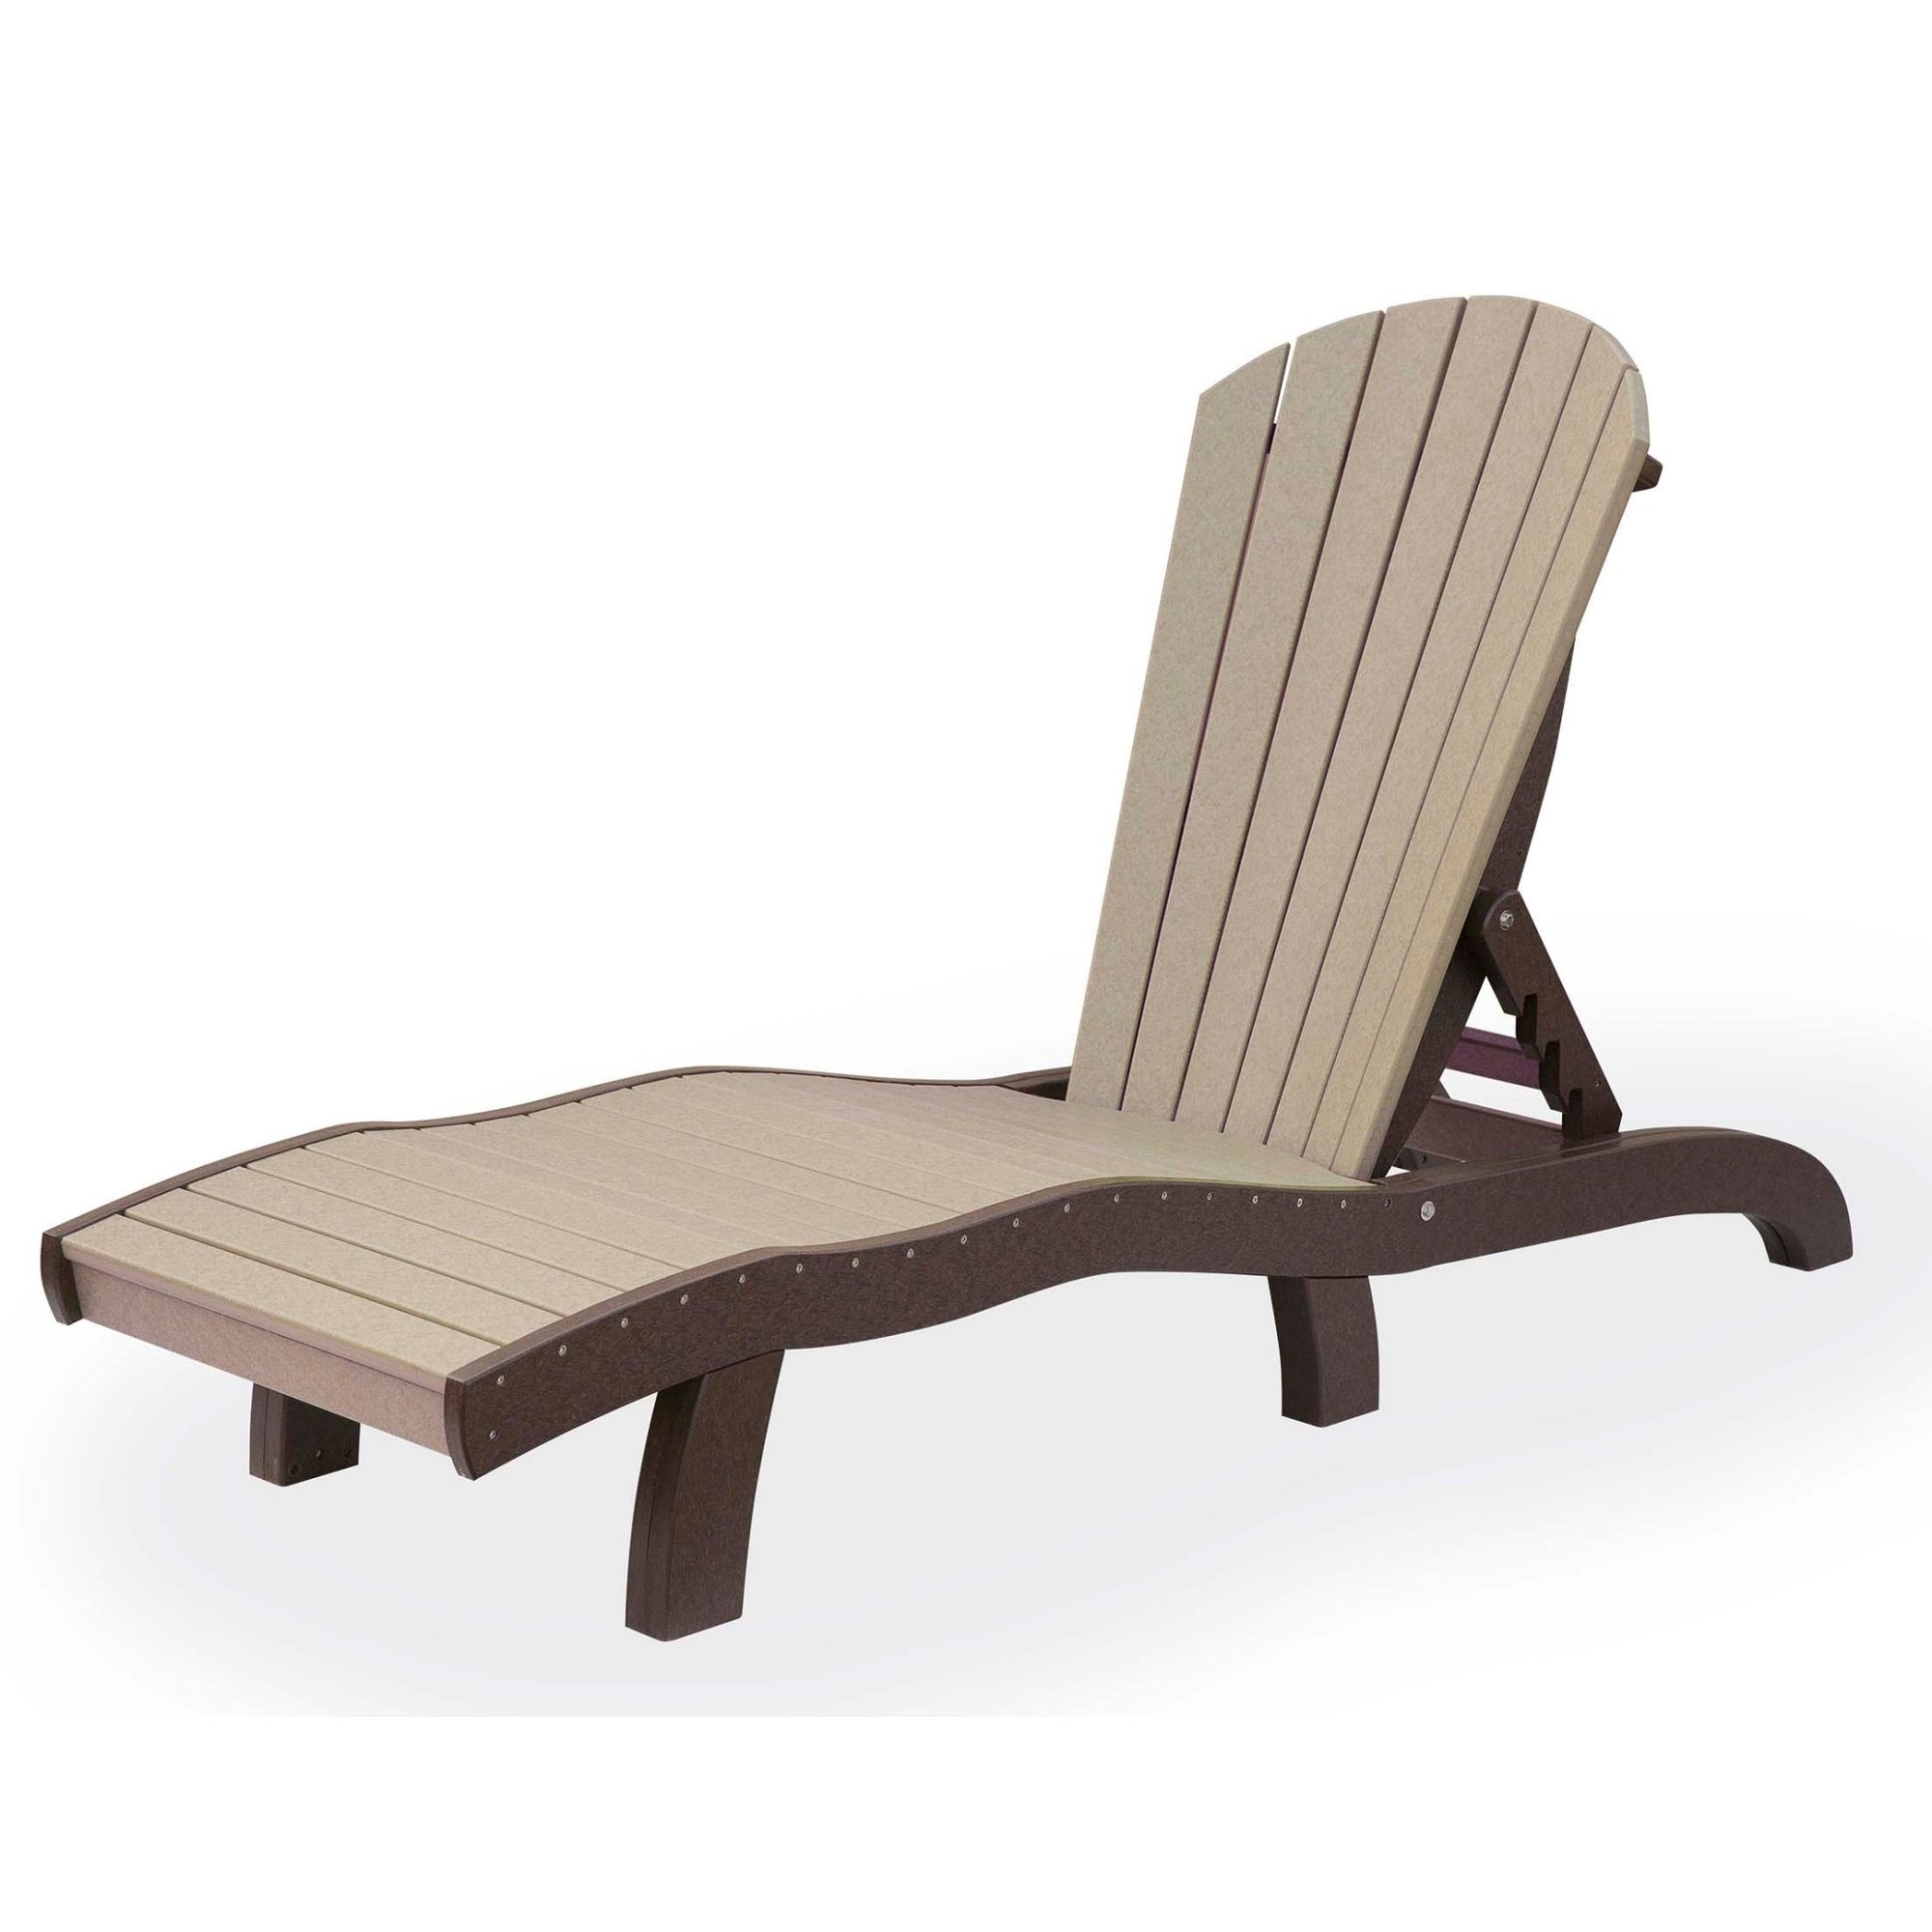 Amish SeaAira Patio Lounge Chair - snyders.furniture